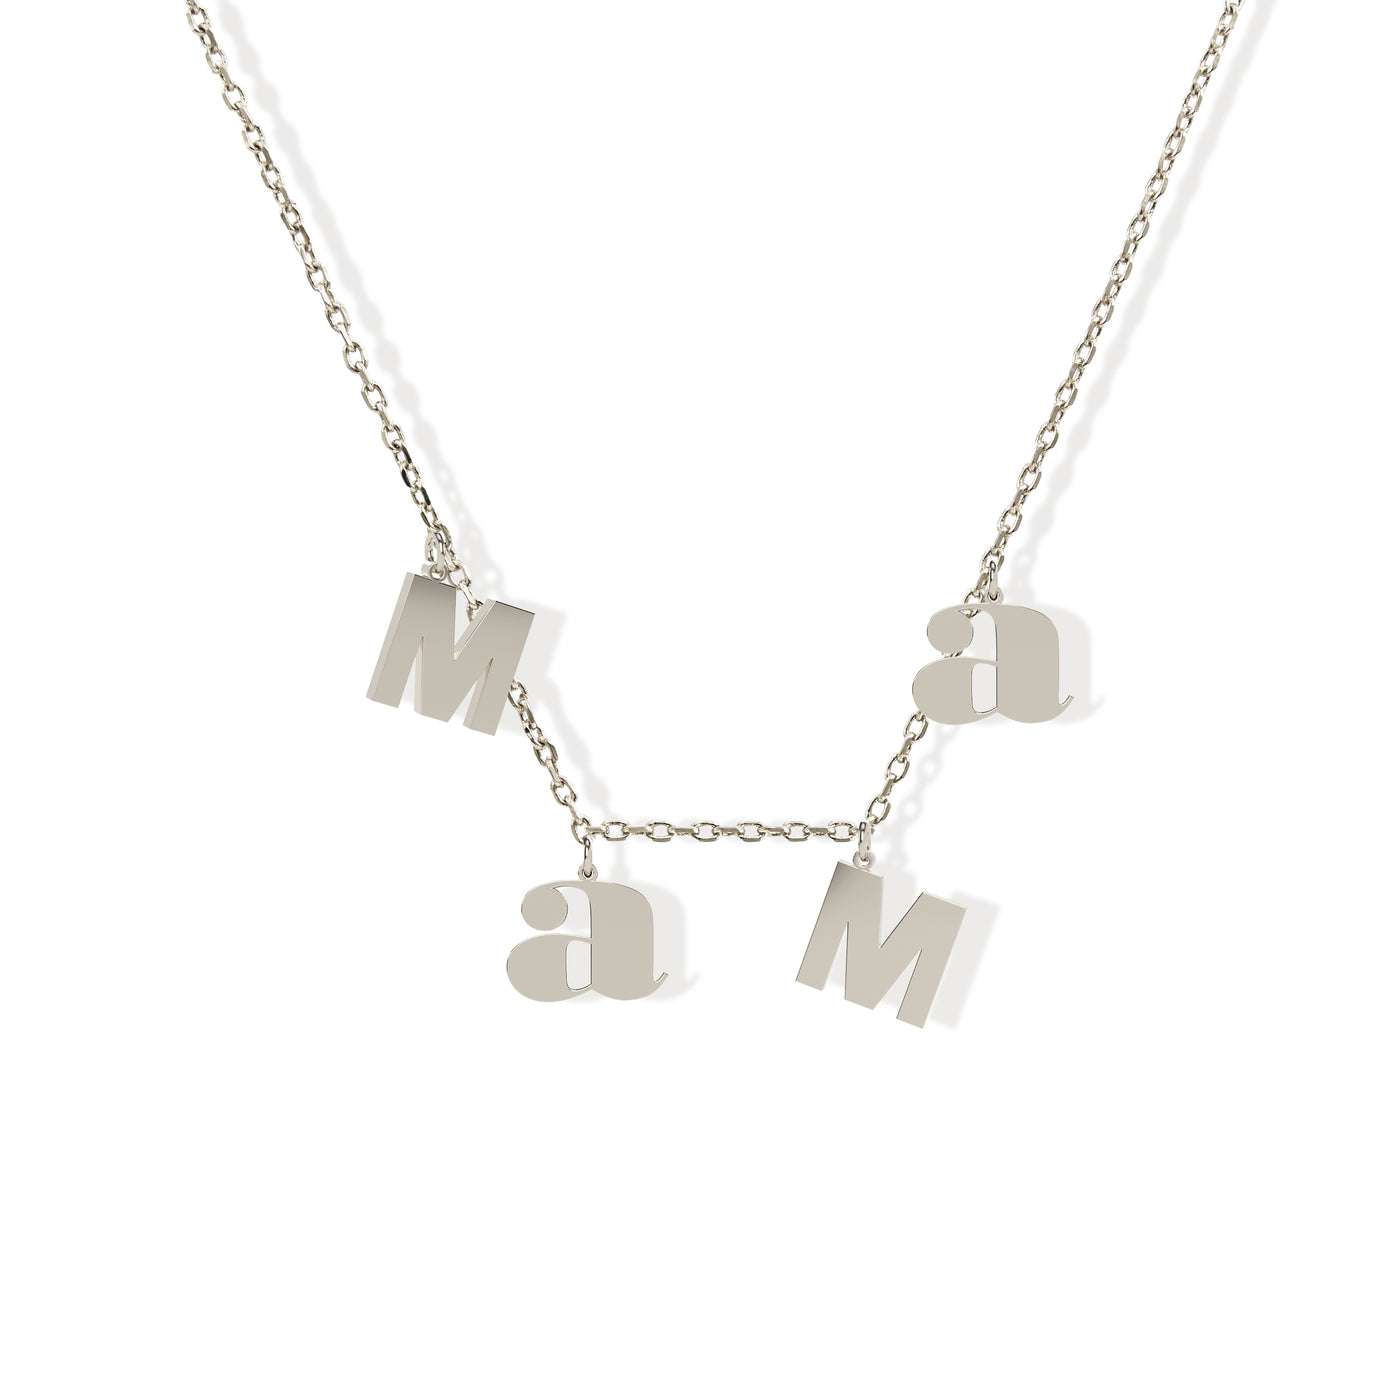 MaMa NECKLACE, Sterling Silver